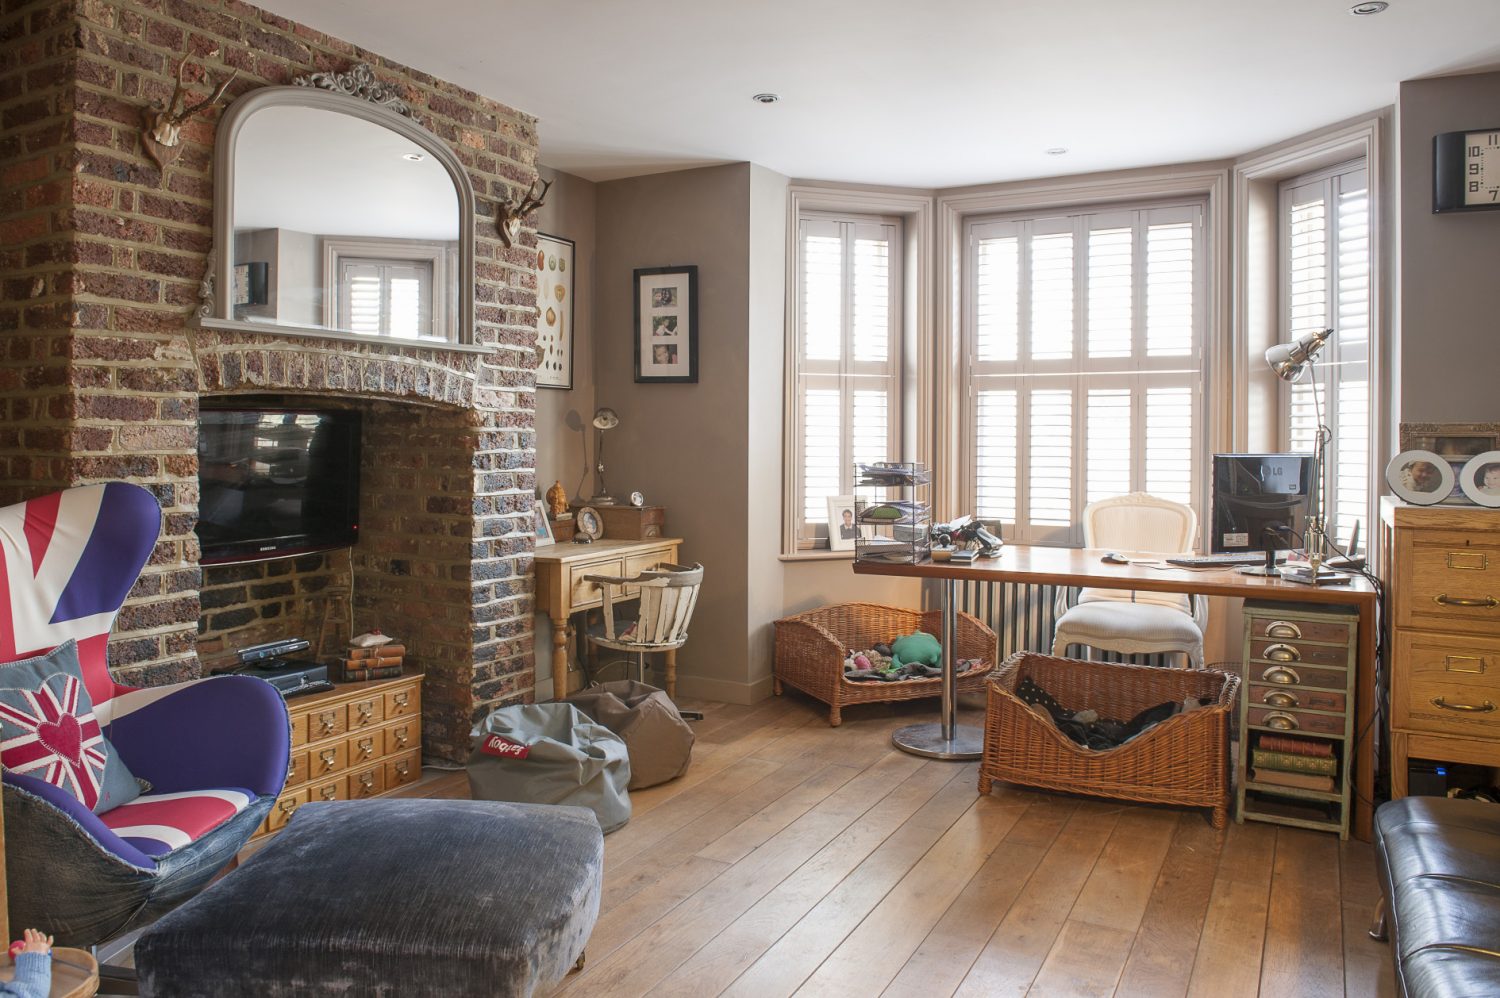 The walls are the original glowing brick and white lime mortar and the floor throughout oak boarding